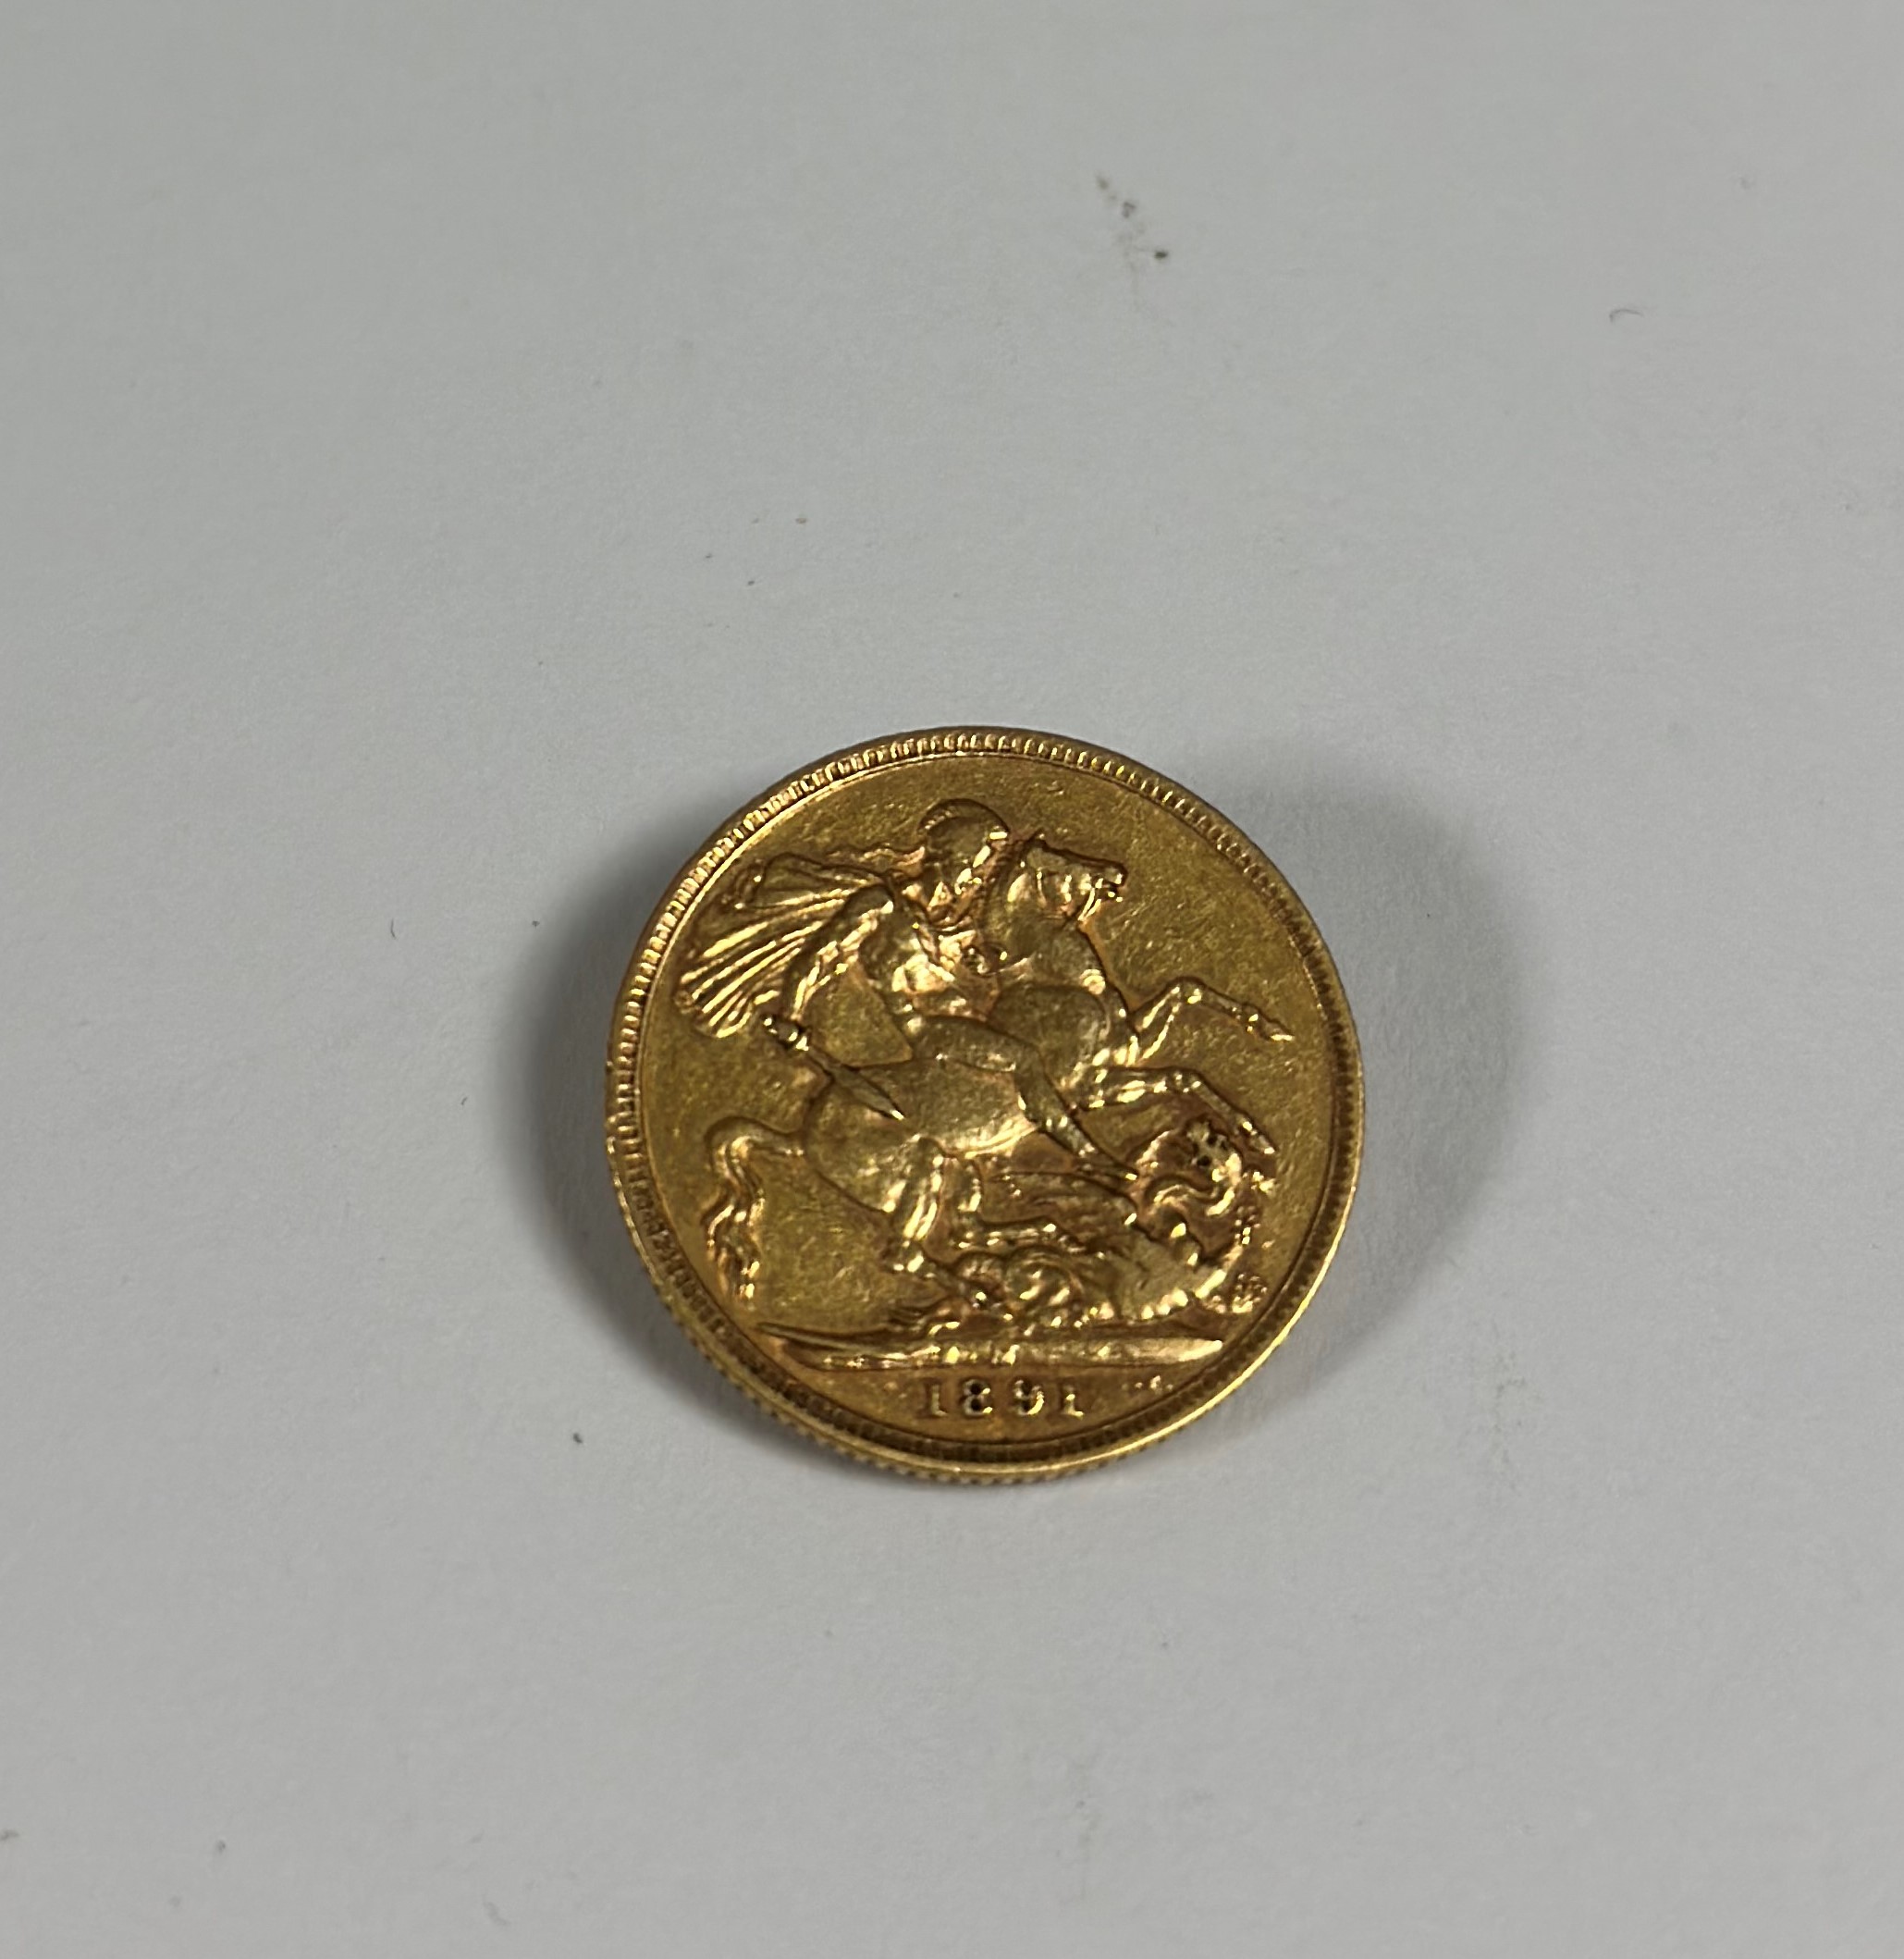 A Victorian full sovereign, 1891.